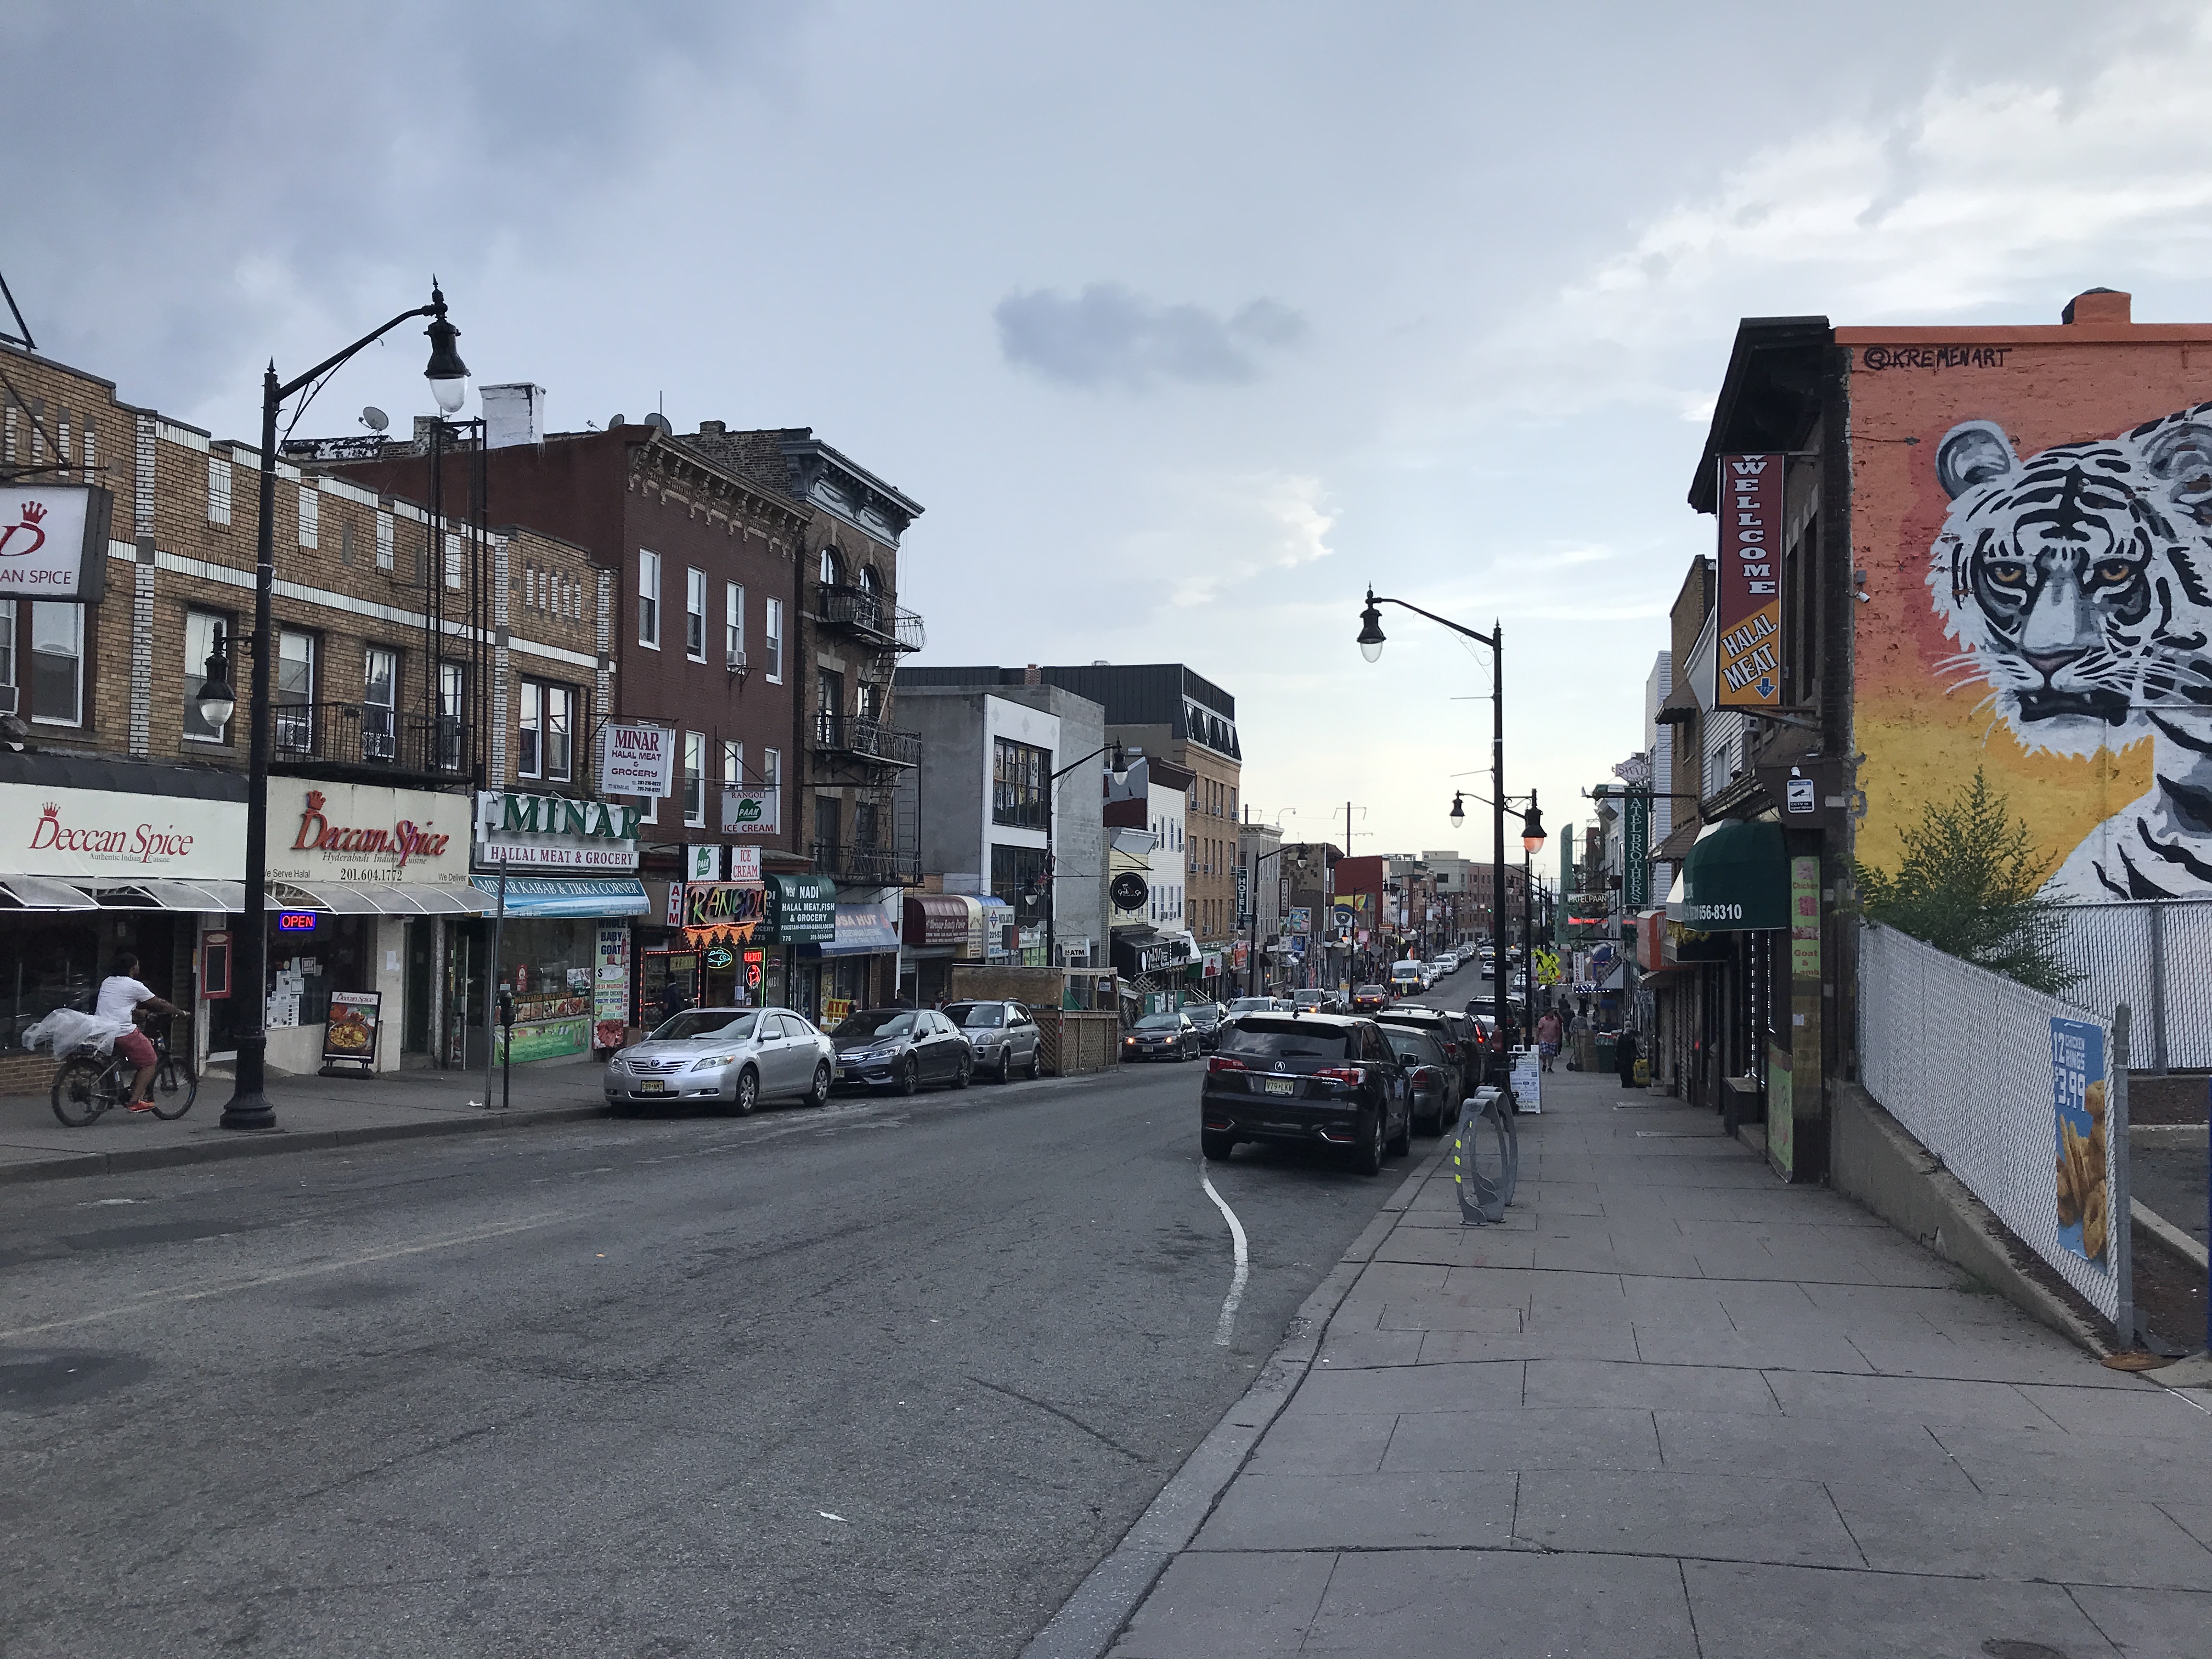 Looking down the sloping hill of India Square, with many Indian restaurants lining the street. A white Bengal tiger mural is painted on one of the building's sides. India Square, Journal Square, Jersey City, New Jersey, United States of America